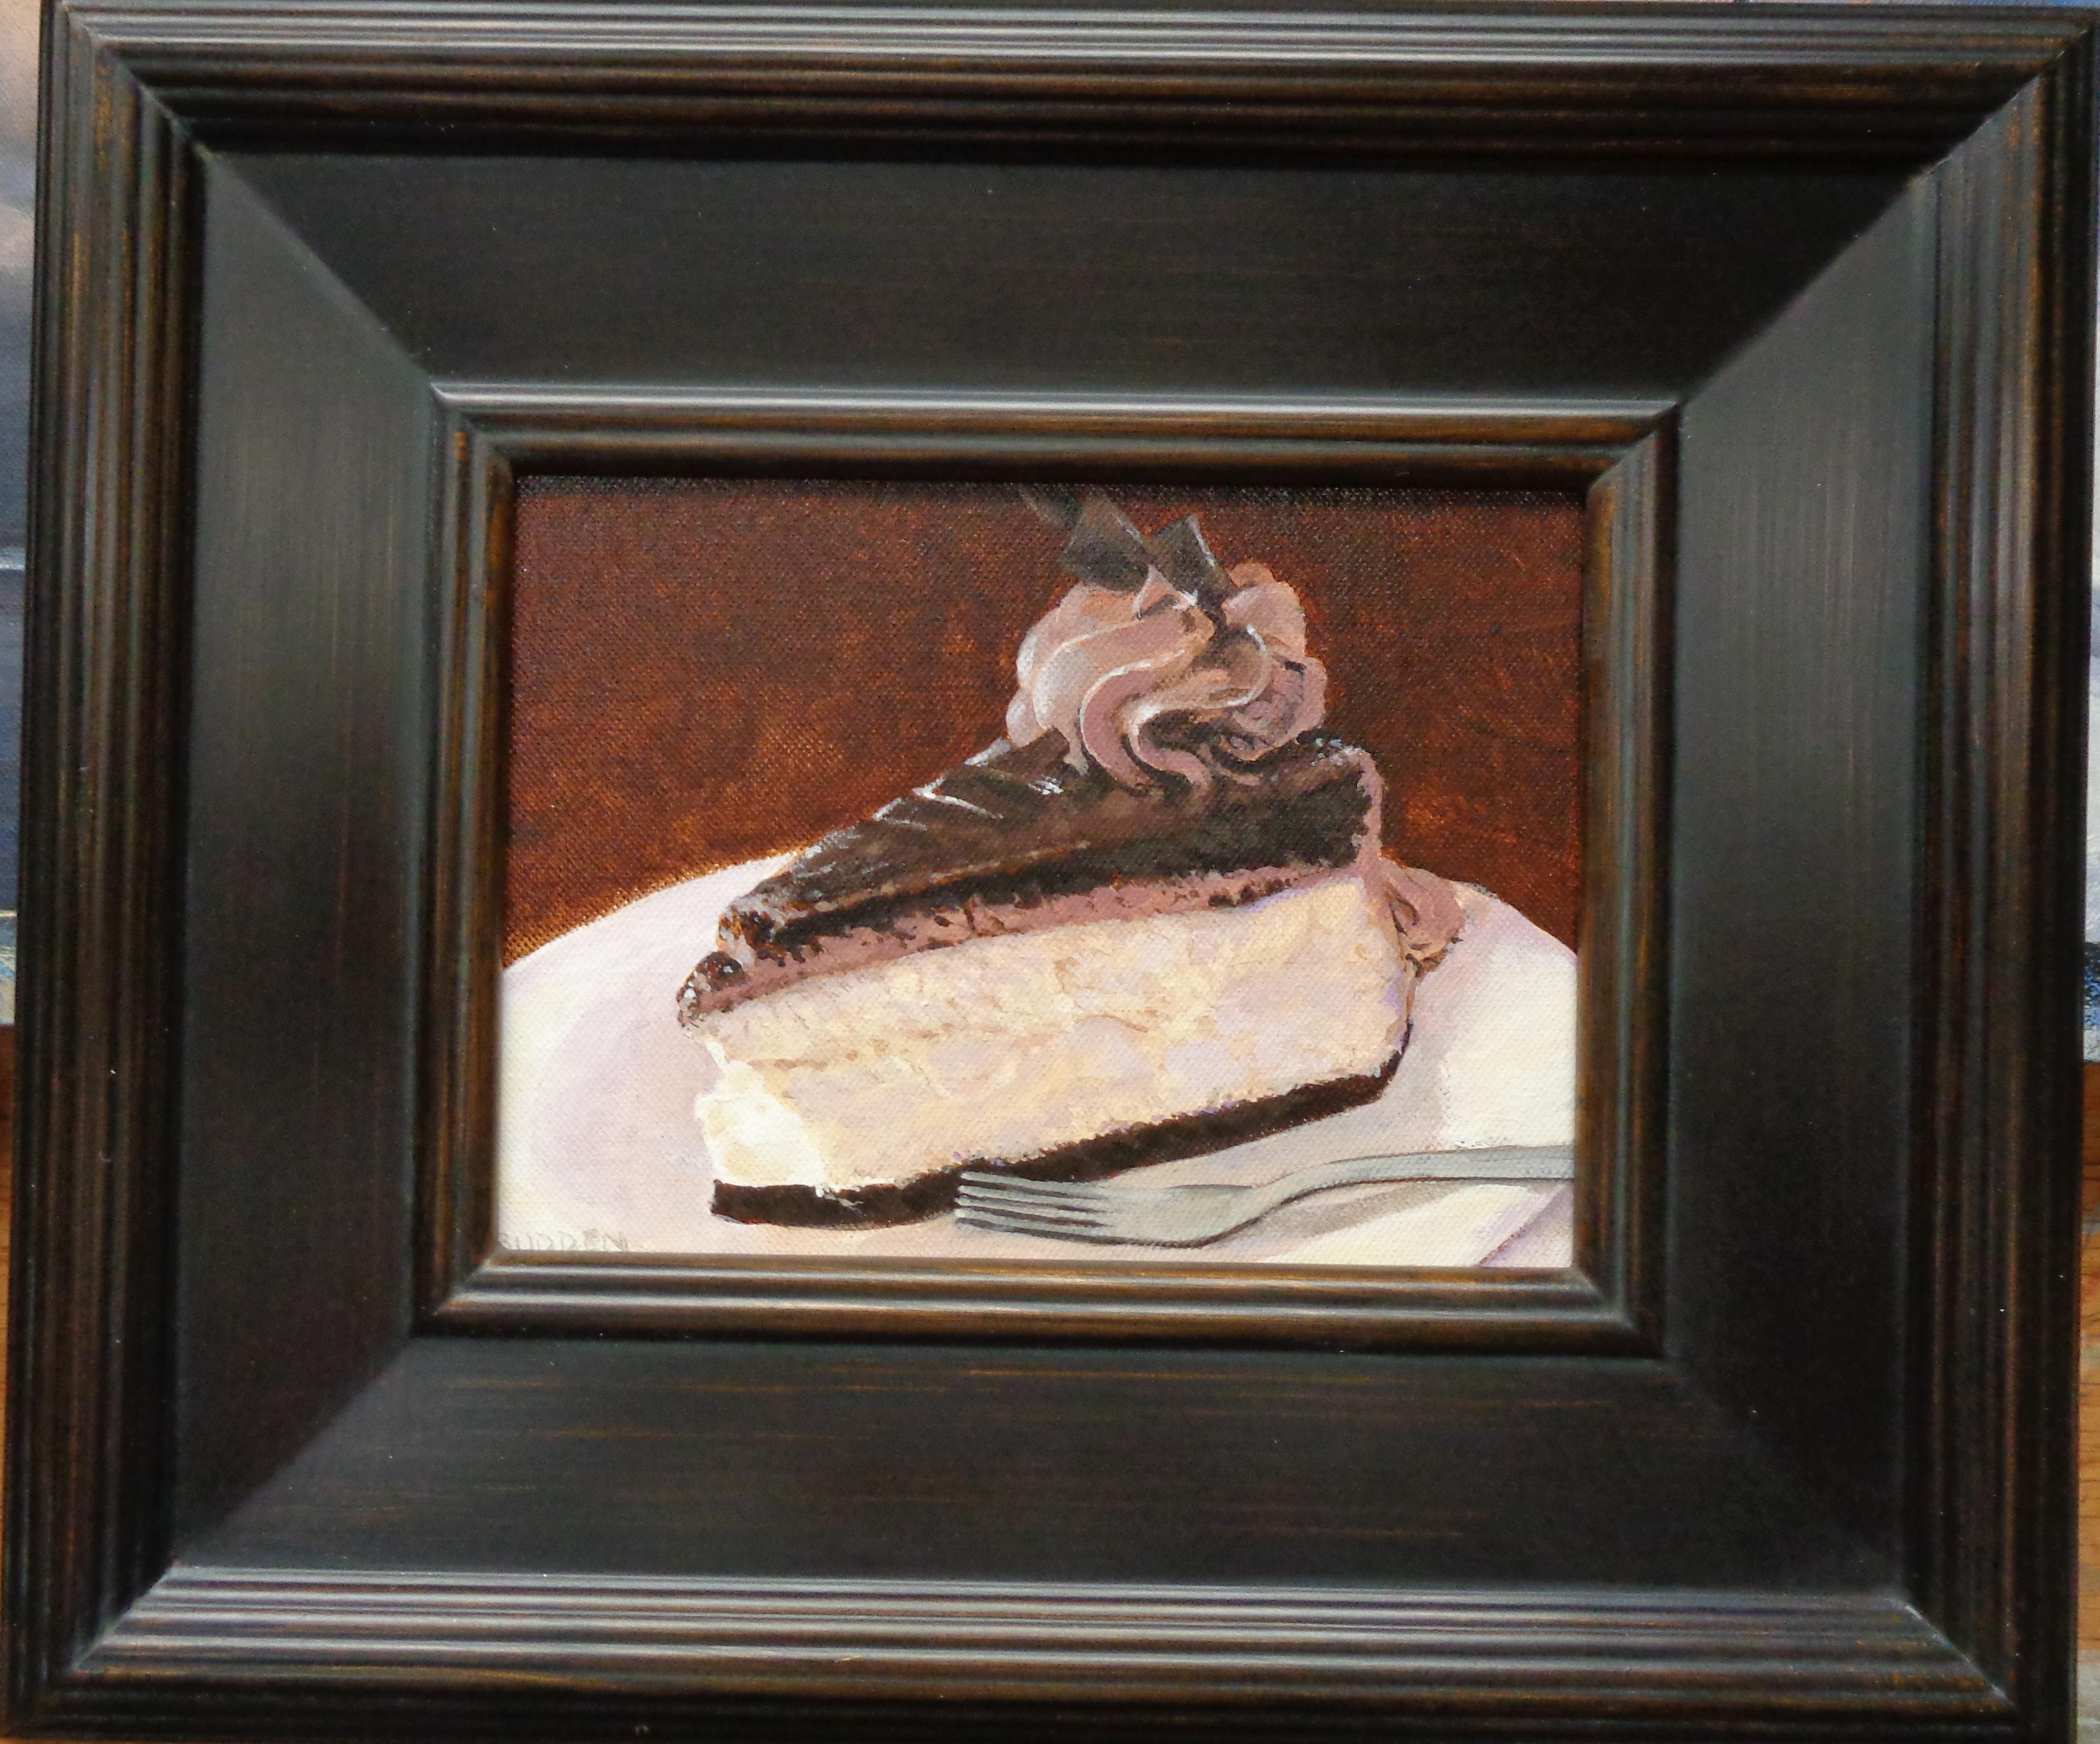 Chocolate Cheesecake
acrylic/panel
6x8 unframed, 11.5 x 13.5 framed
An acrylic painting on canvas by award winning contemporary artist Michael Budden that showcases a chocolate cheesecake.  Painting is new not previously owned.
ARTIST'S STATEMENT
I